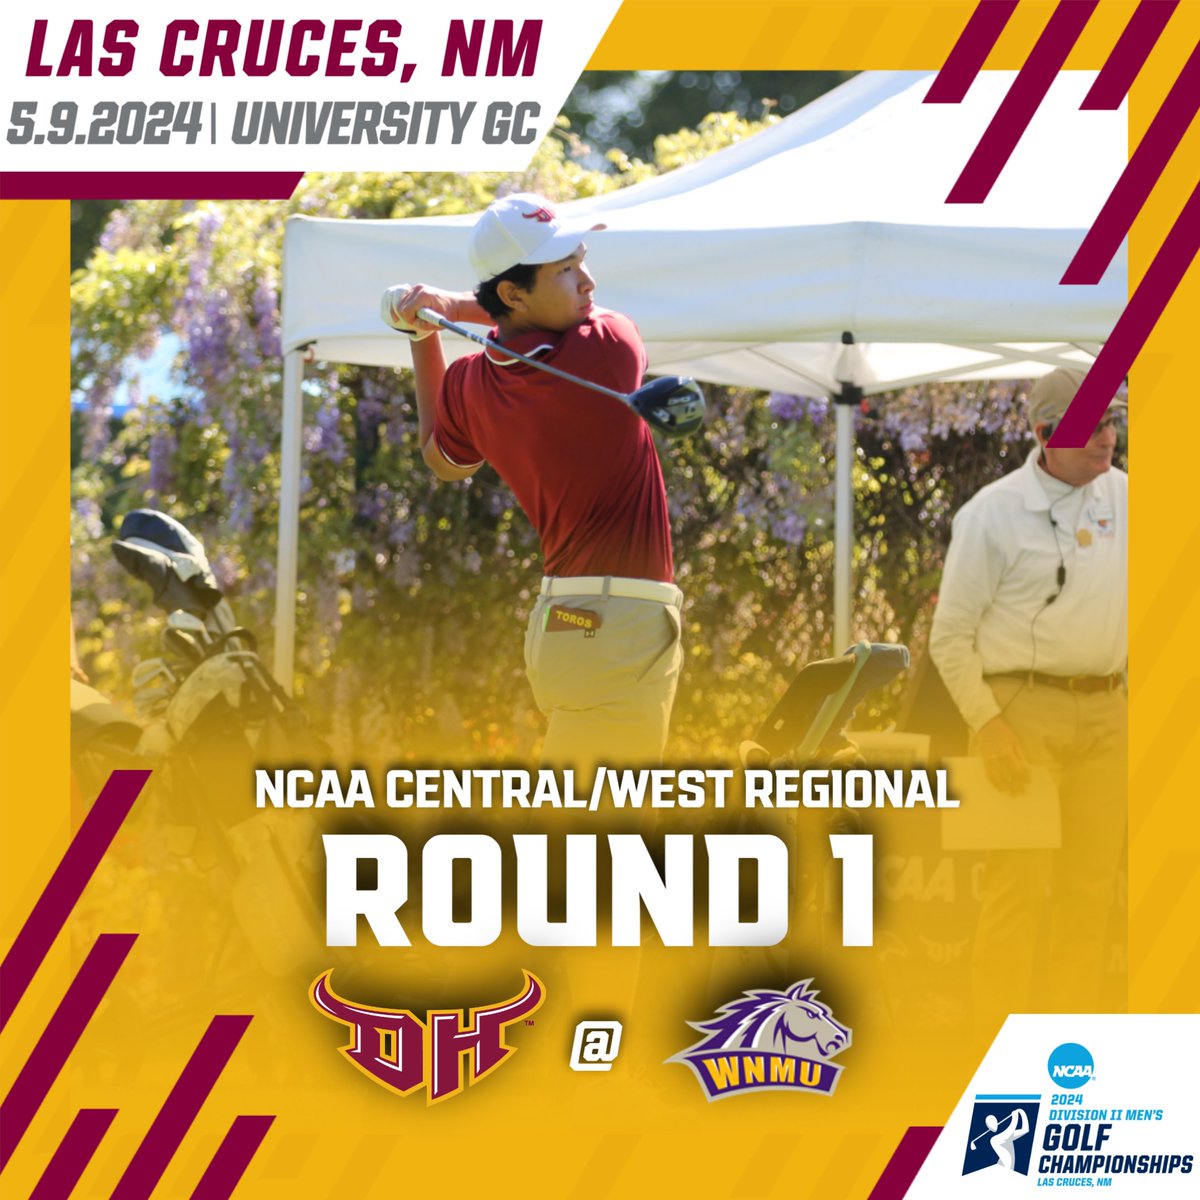 Francis Bautista tees off for Round 1 as he represents @CSUDHgolf today at the NCAA Central/West Region in Las Cruces, NM!